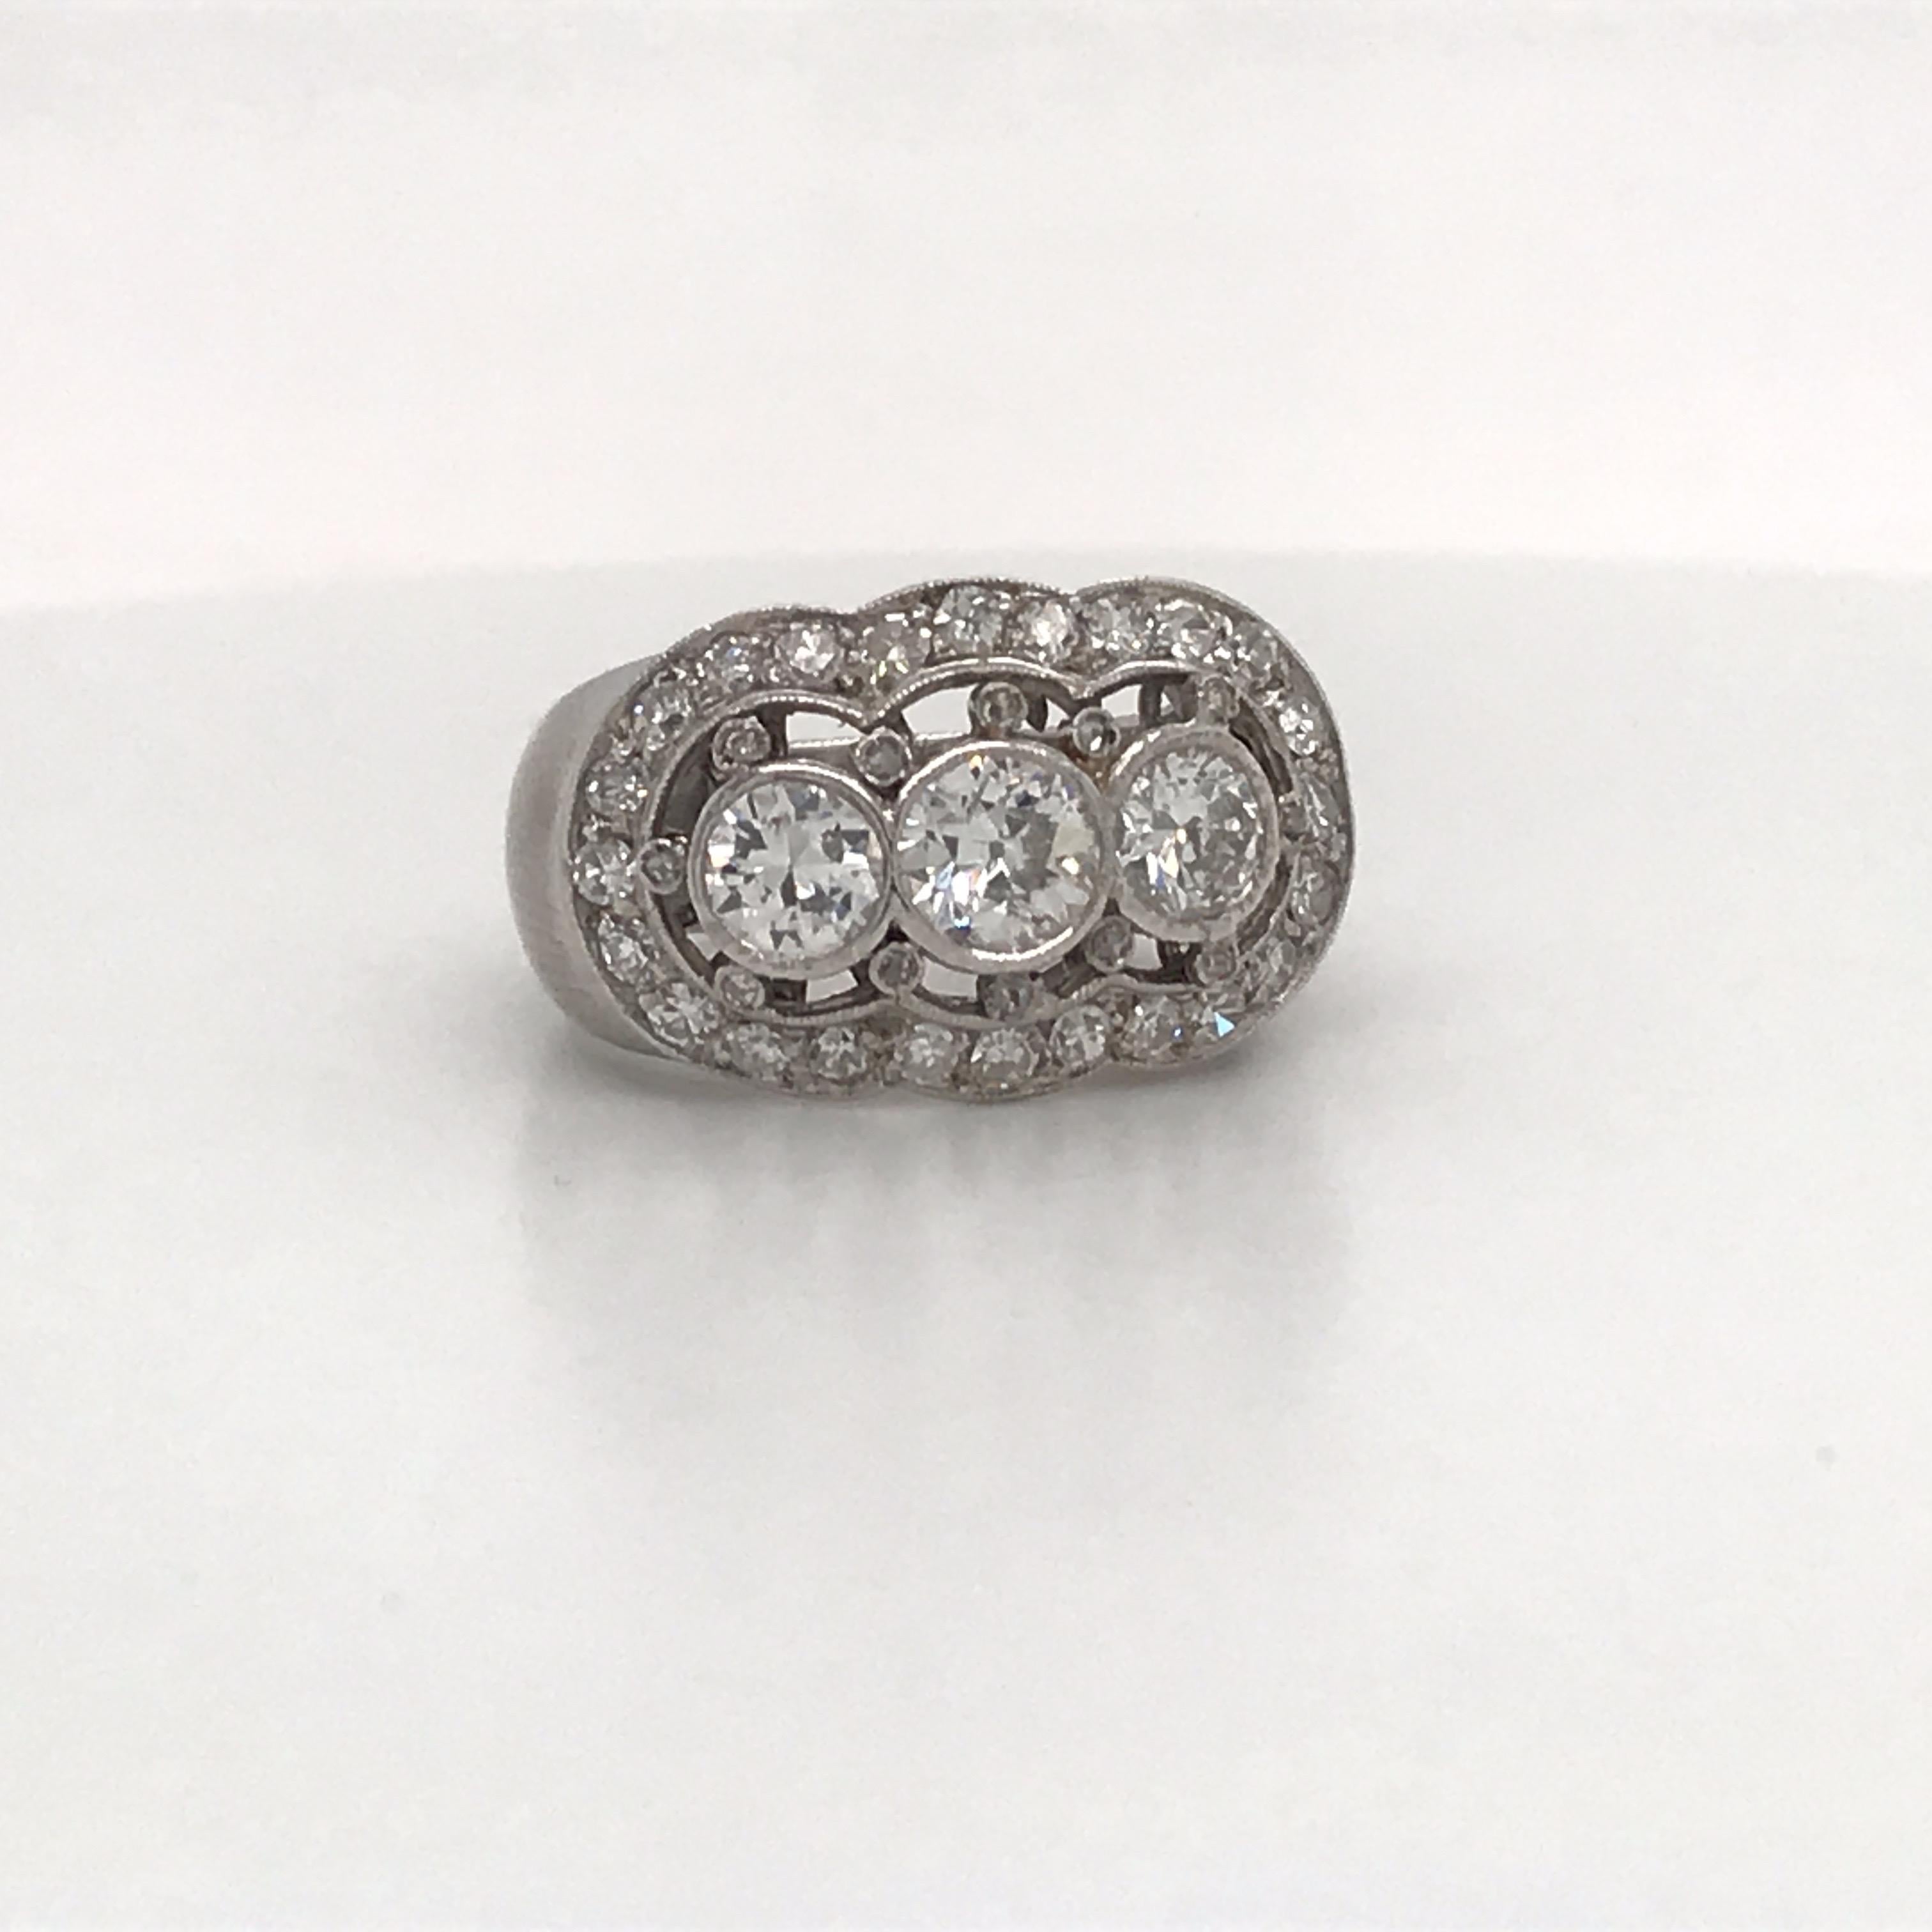 Vintage diamond ring featuring three diamonds flanked with smaller diamonds weighing approximately 2 carats, crafted in platinum. 